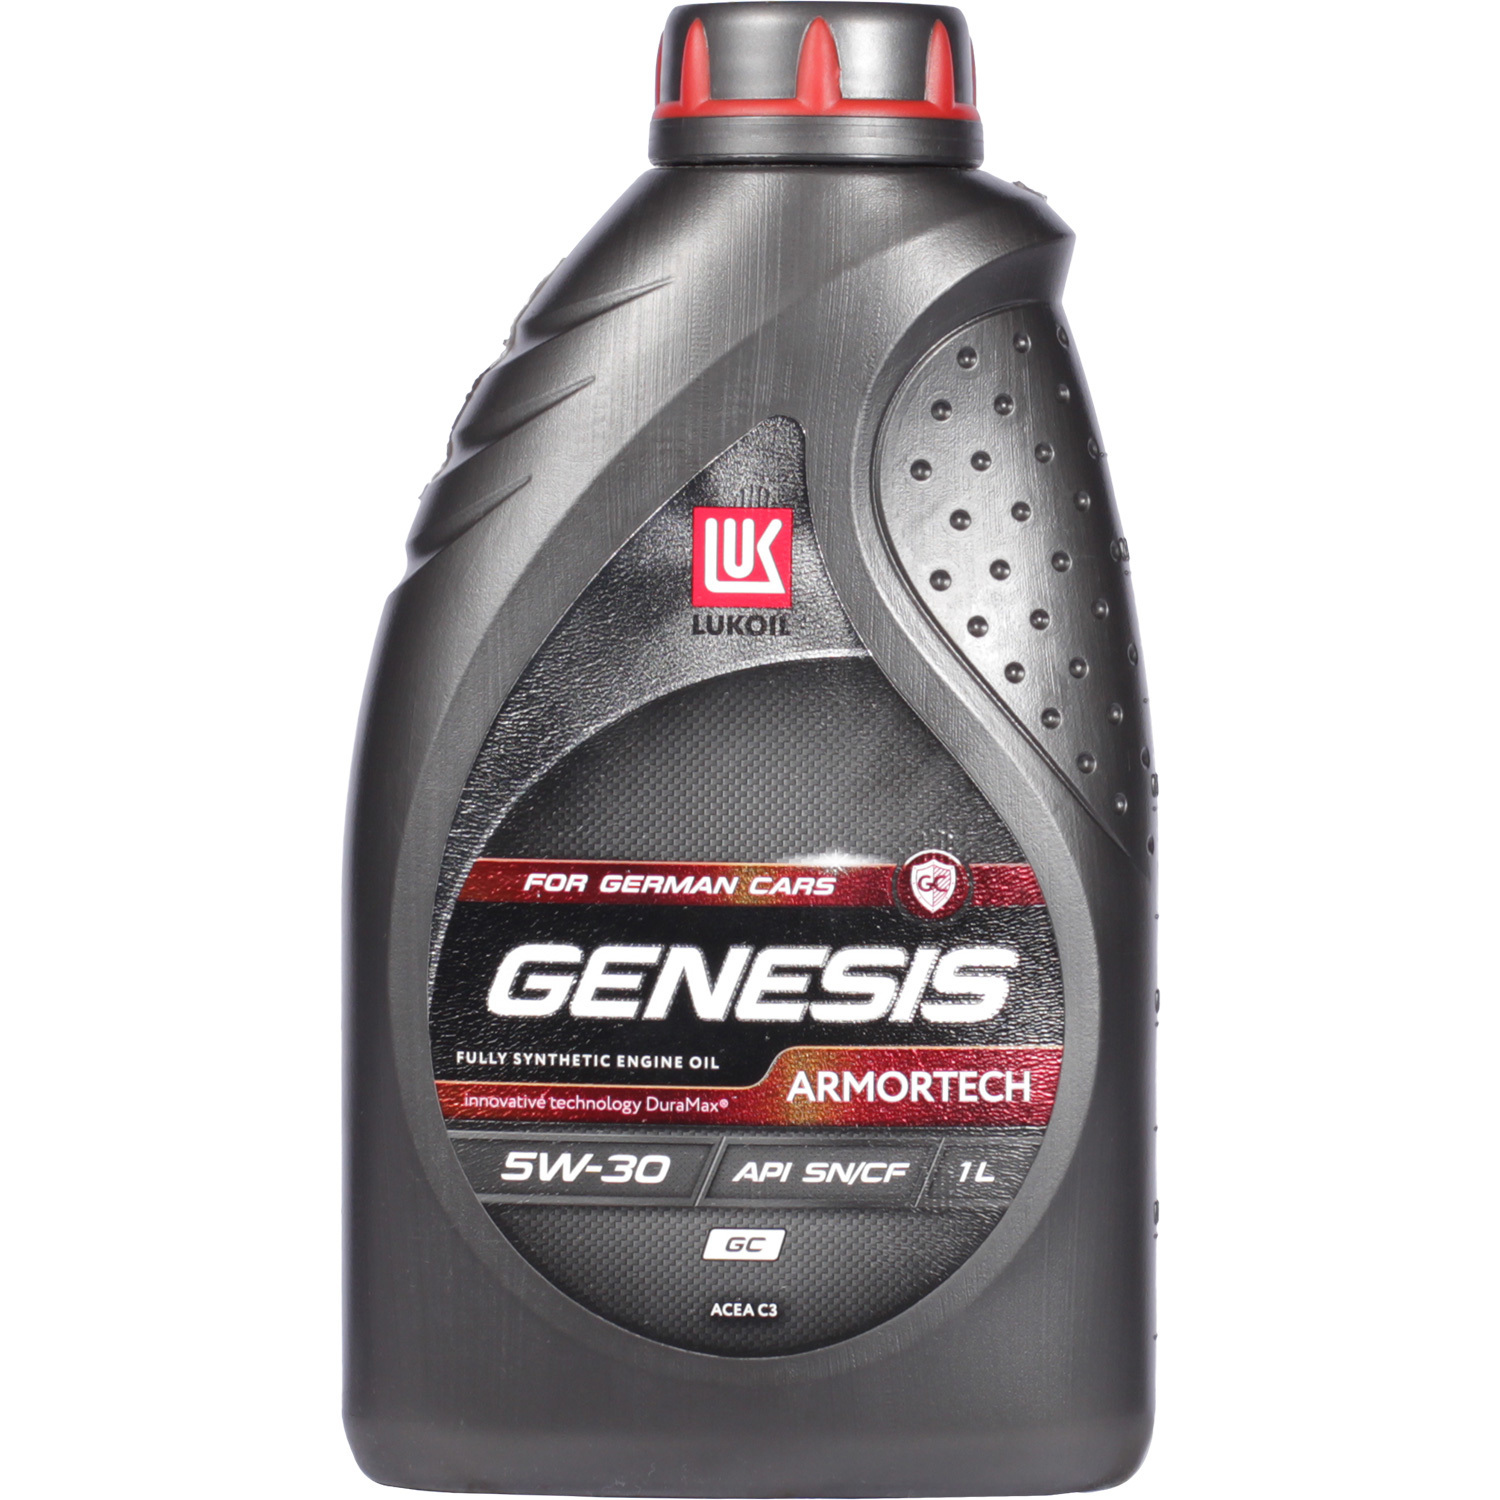 Lukoil Моторное масло Lukoil Genesis Armortech GC 5W-30, 1 л lukoil моторное масло lukoil genesis armortech 5w 40 57 л